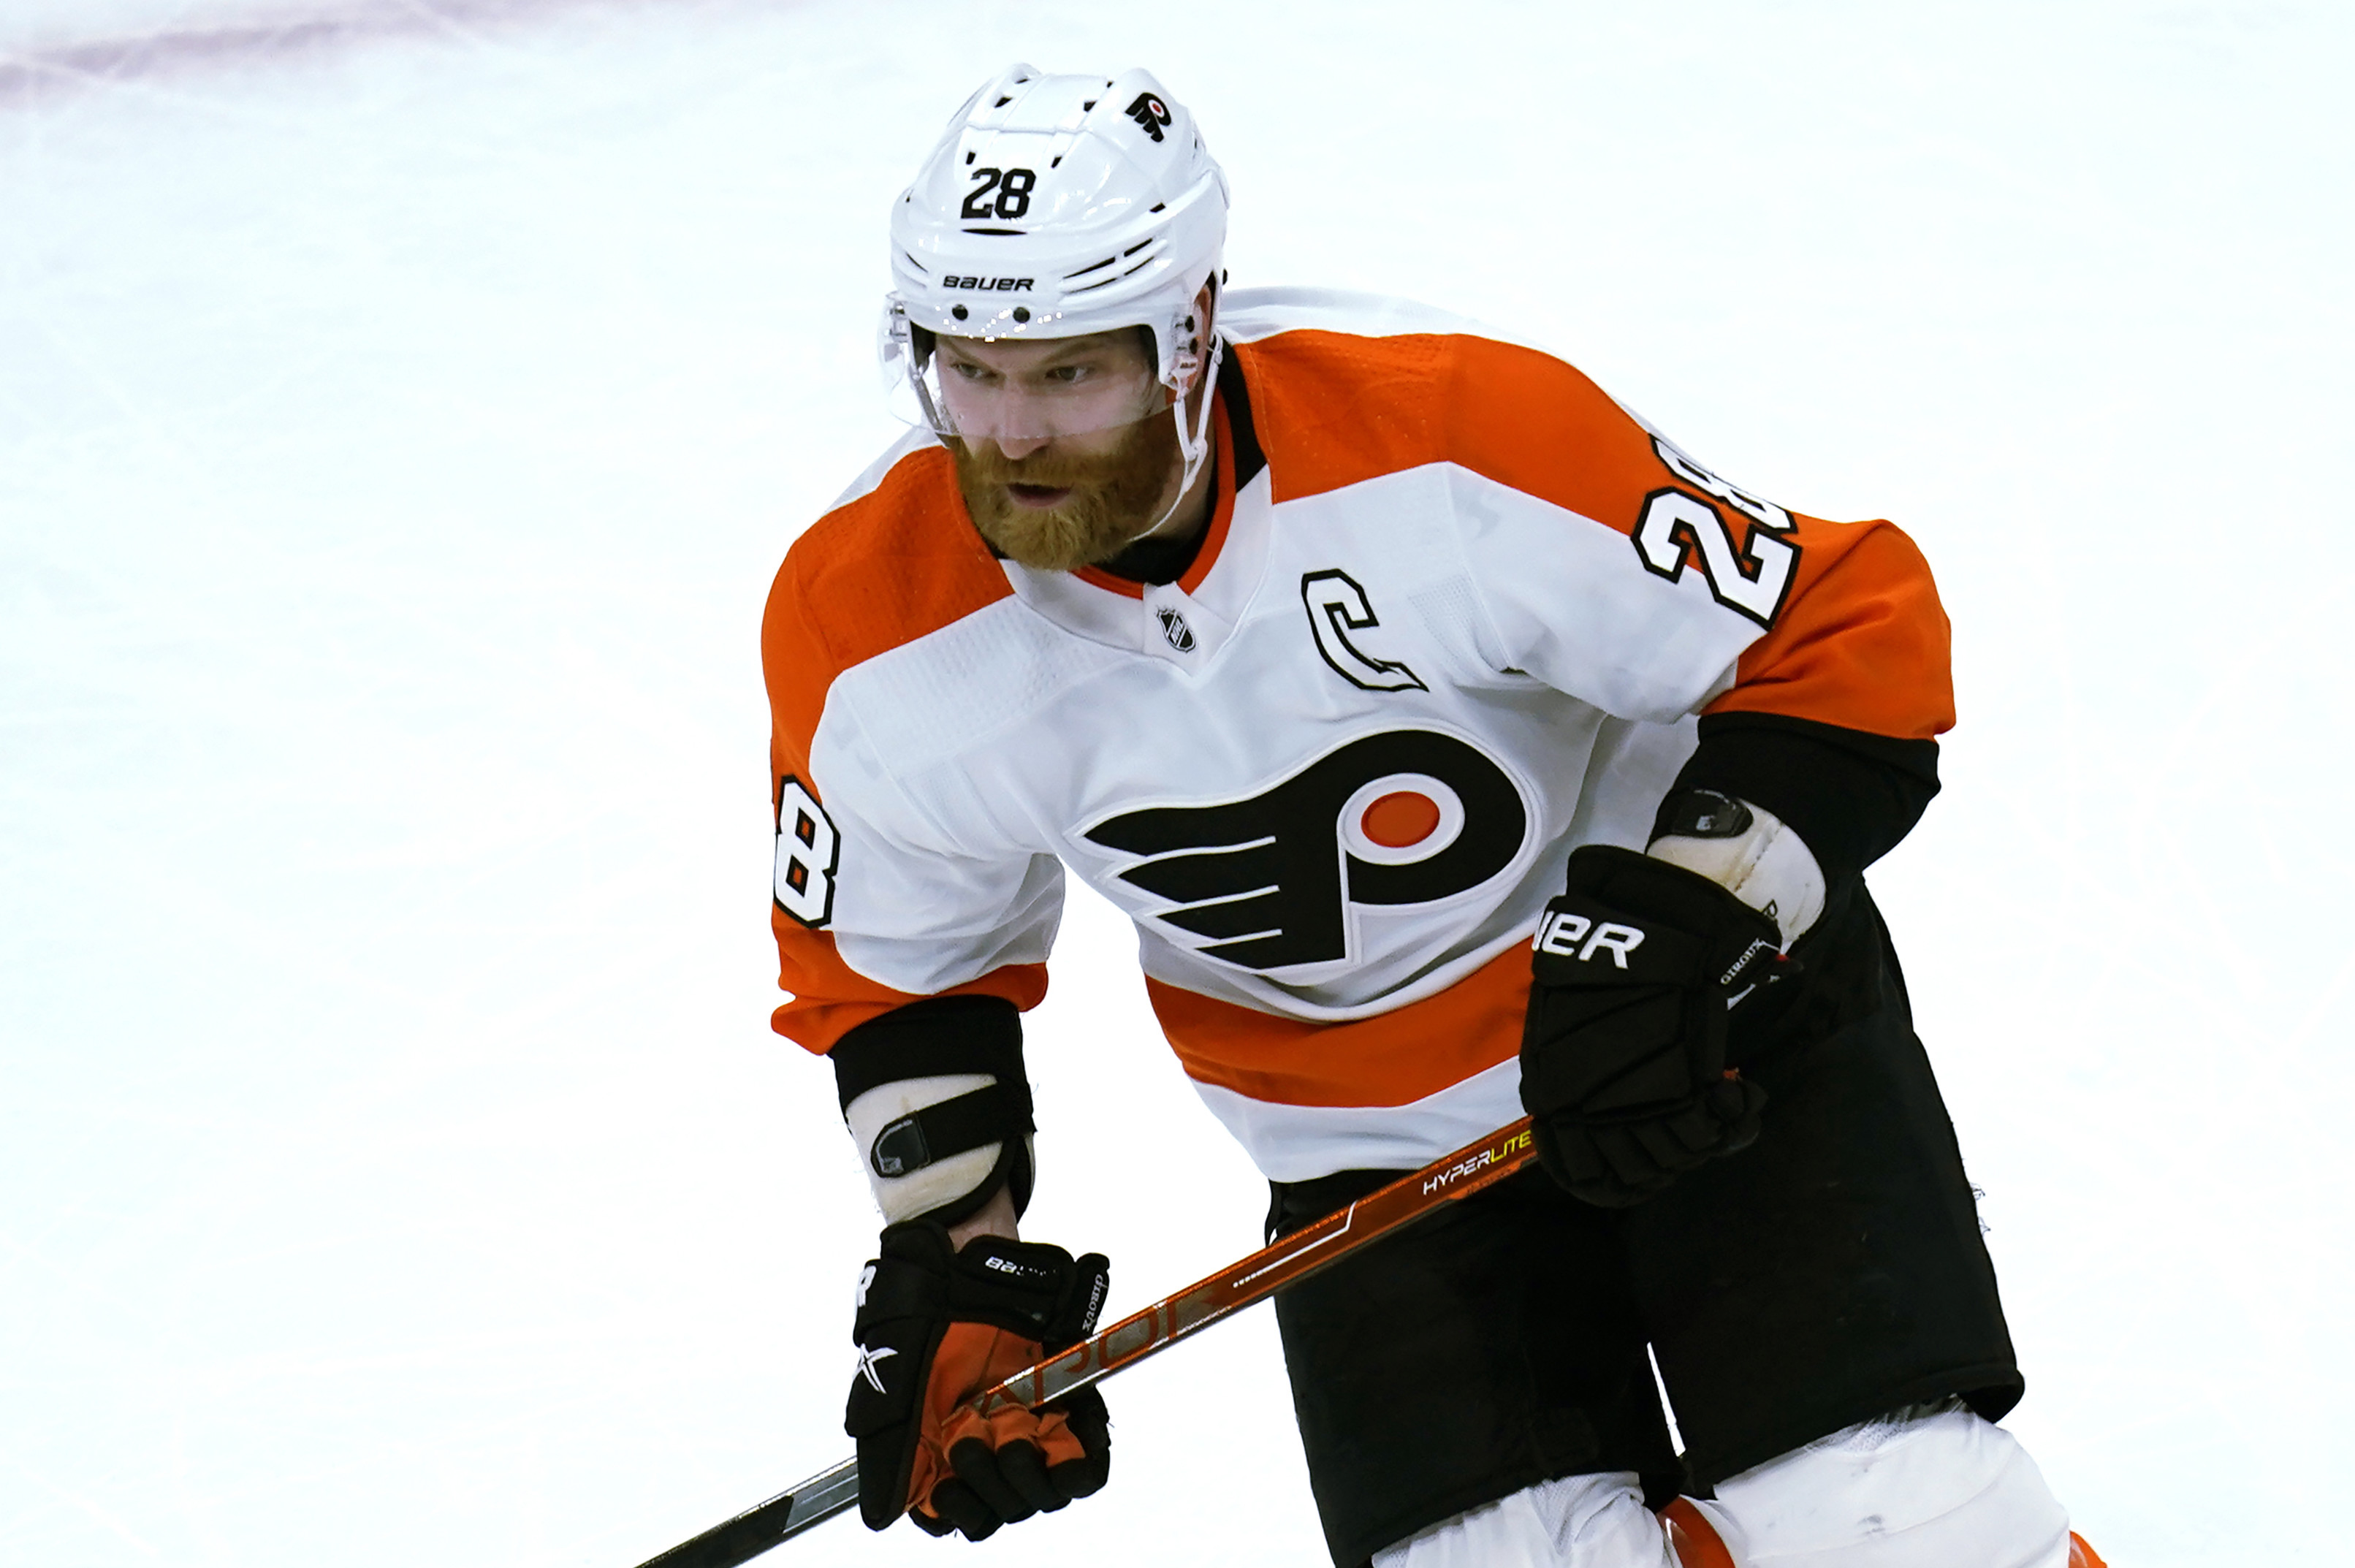 Claude Giroux misses another Stanley Cup chance with Florida